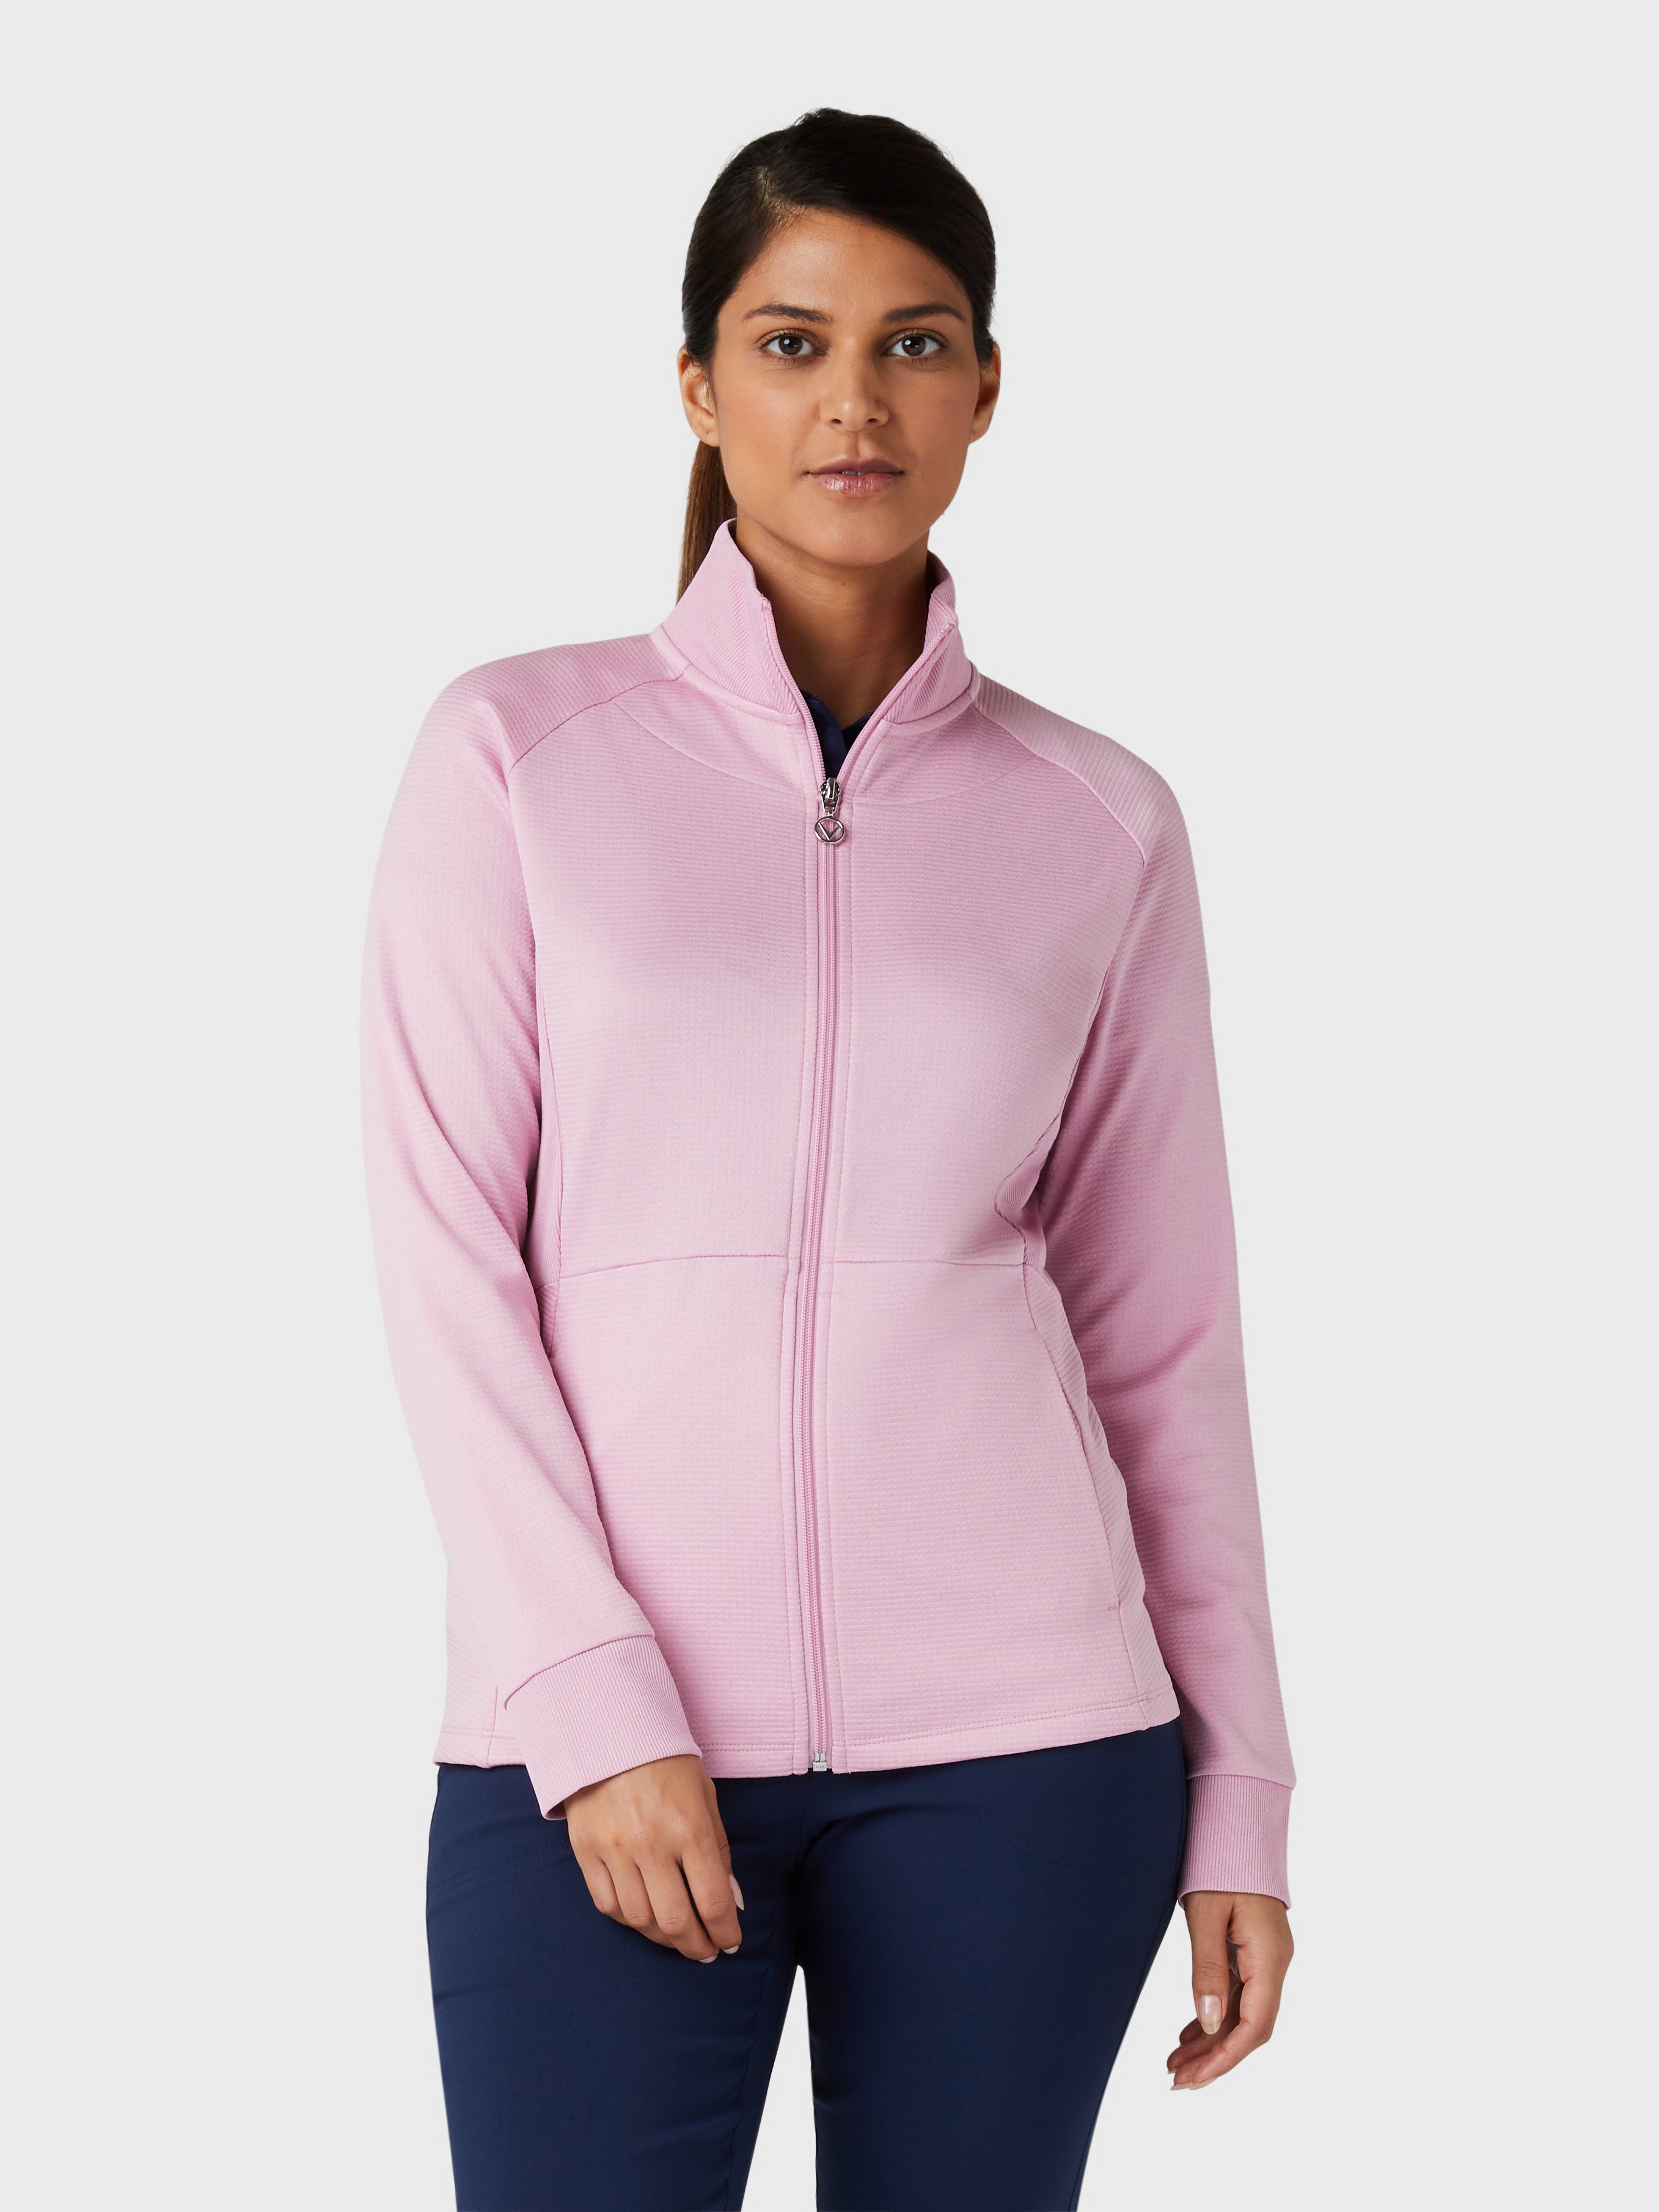 View Midweight Waffle Fleece Womens Jacket In Pink Nectar Heather Pink Nectar Htr S information